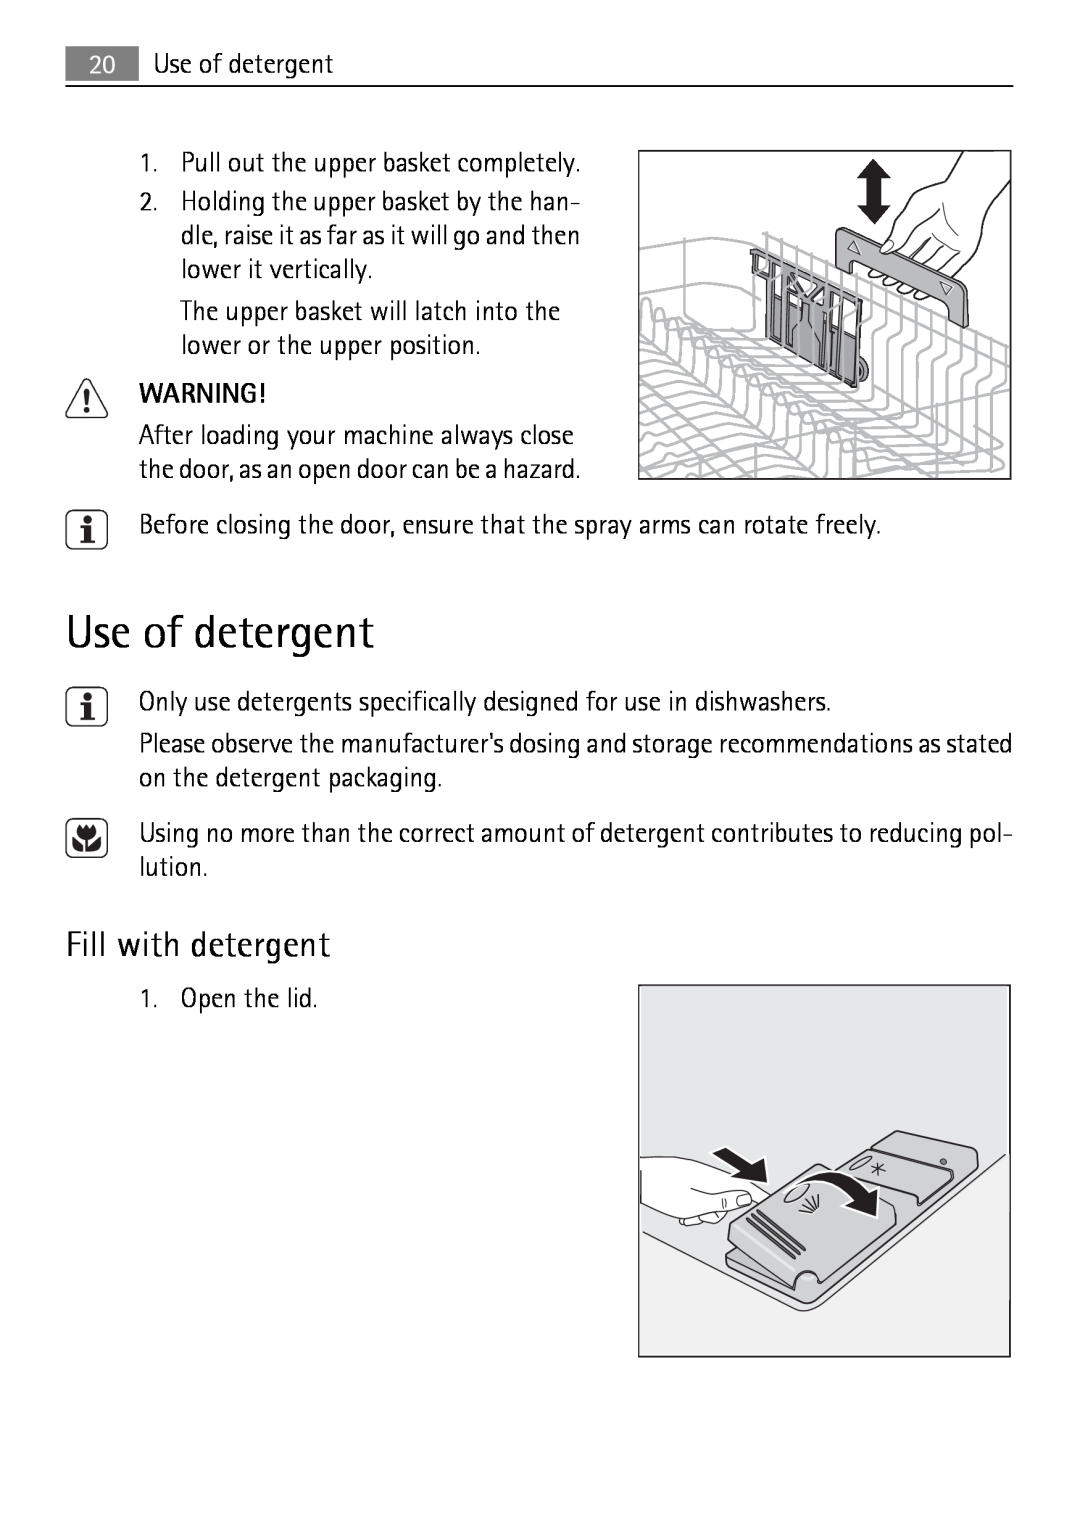 Electrolux 65011 VI user manual Use of detergent, Fill with detergent 